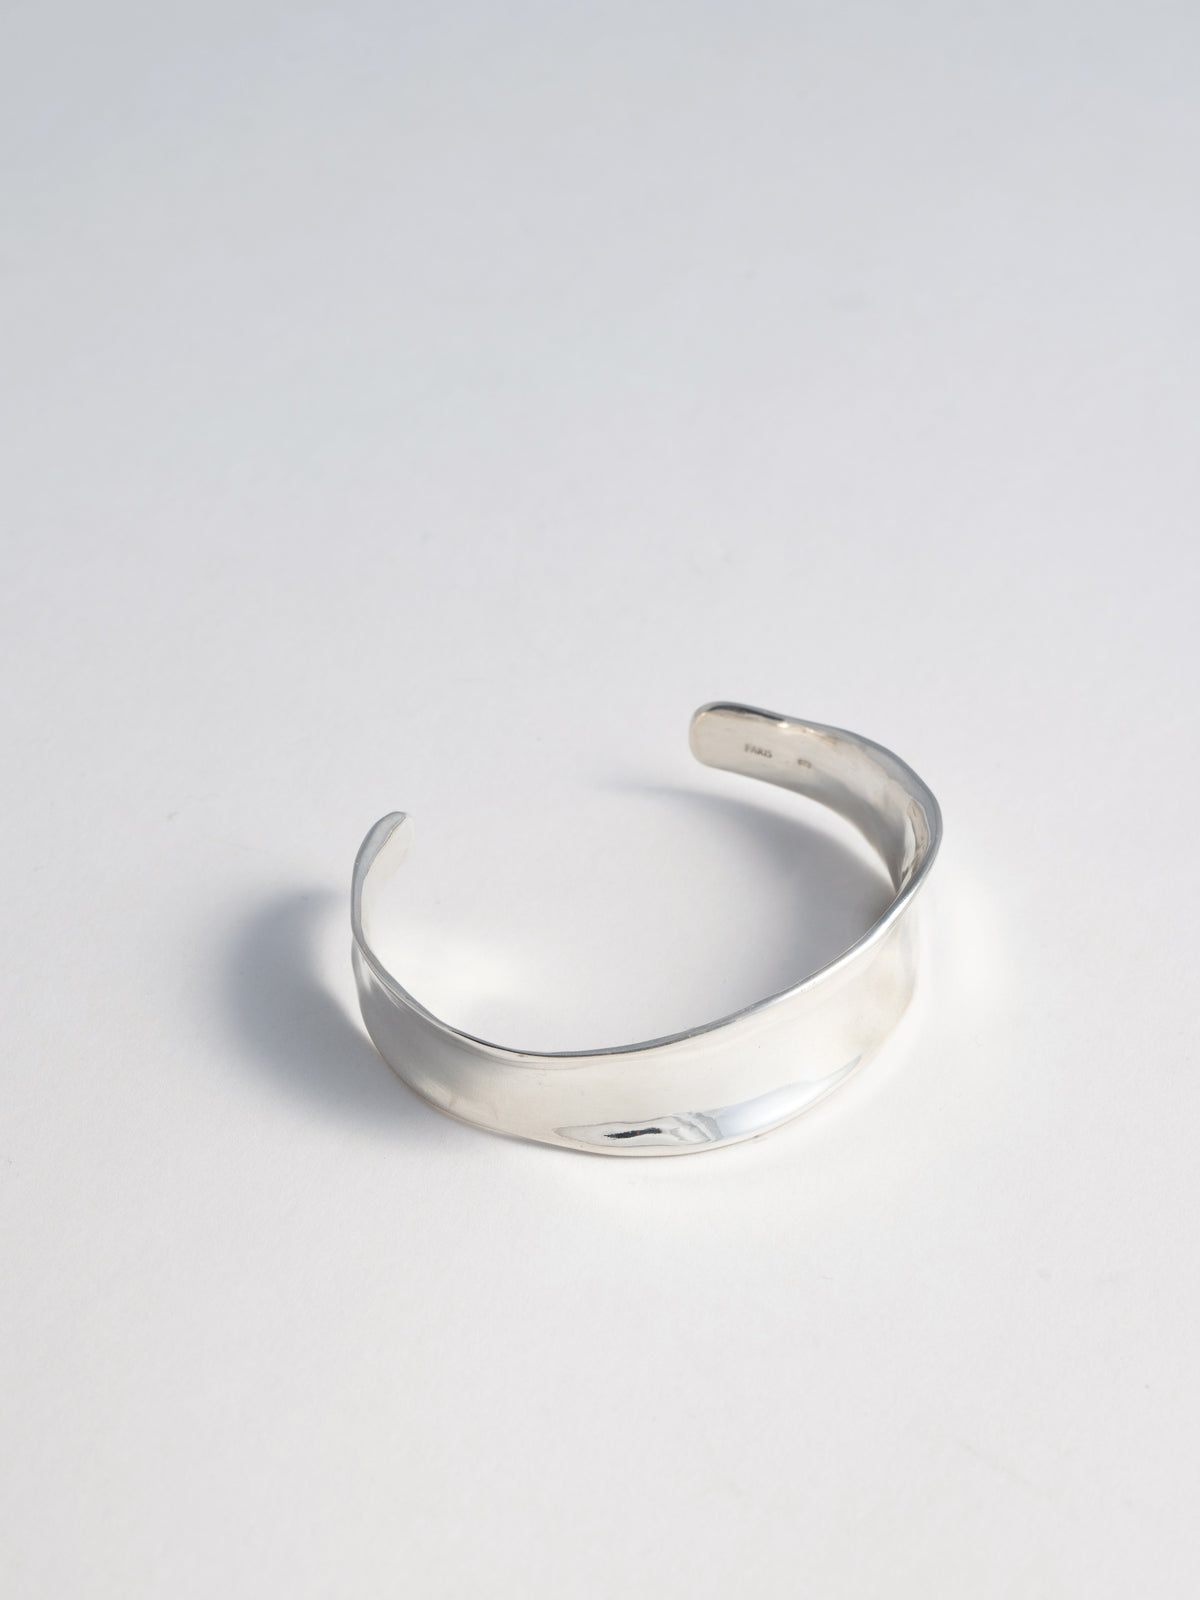 Product image of FARIS VERSUS Cuff in sterling silver, slightly turned to the side to show form